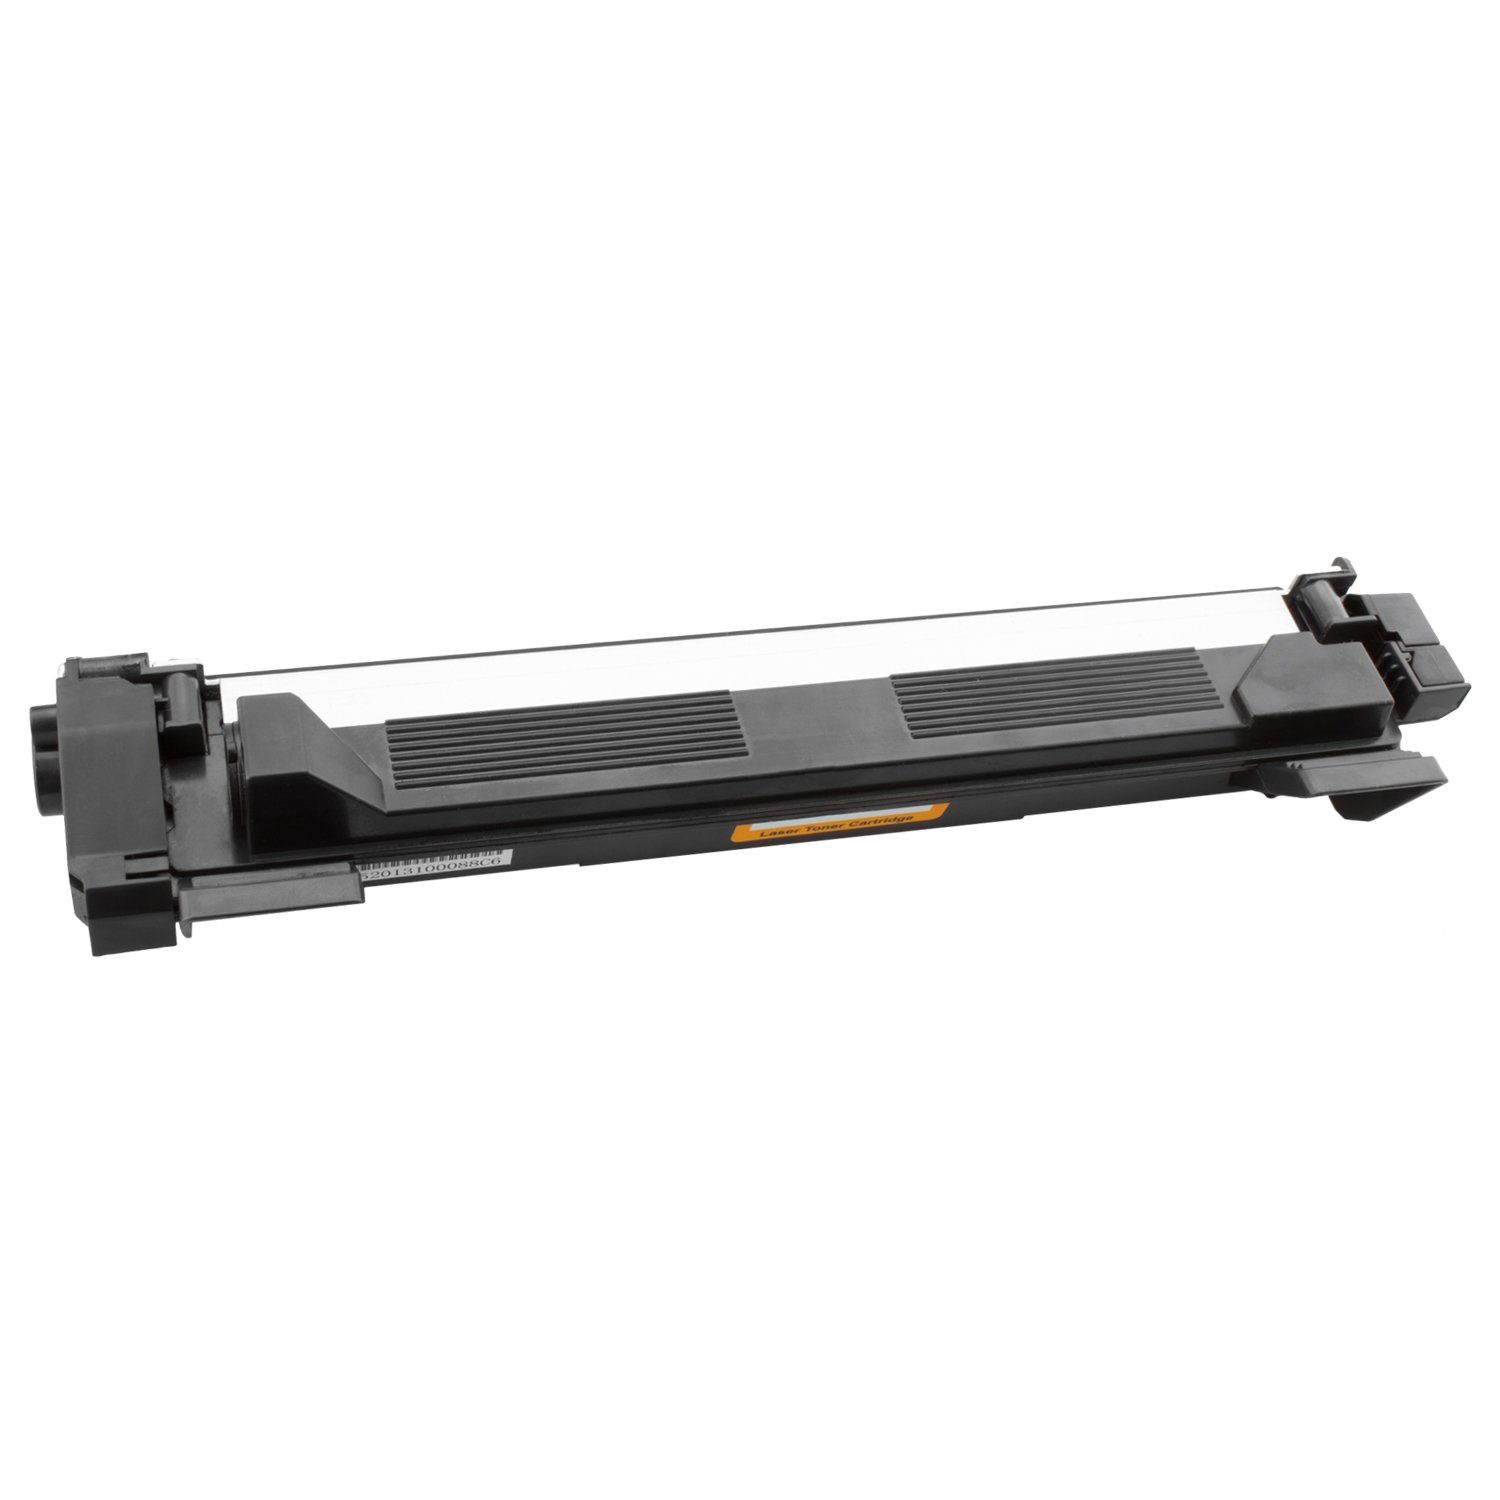 TN HL-1110 DCP-1512 TN-1050 DCP-1510 DCP-1612W Toner (1x BrotherTN1050, Tito-Express Black), für Tonerpatrone 1050 Brother MFC-1910W Brother DCP-1610W ersetzt MFC-1810